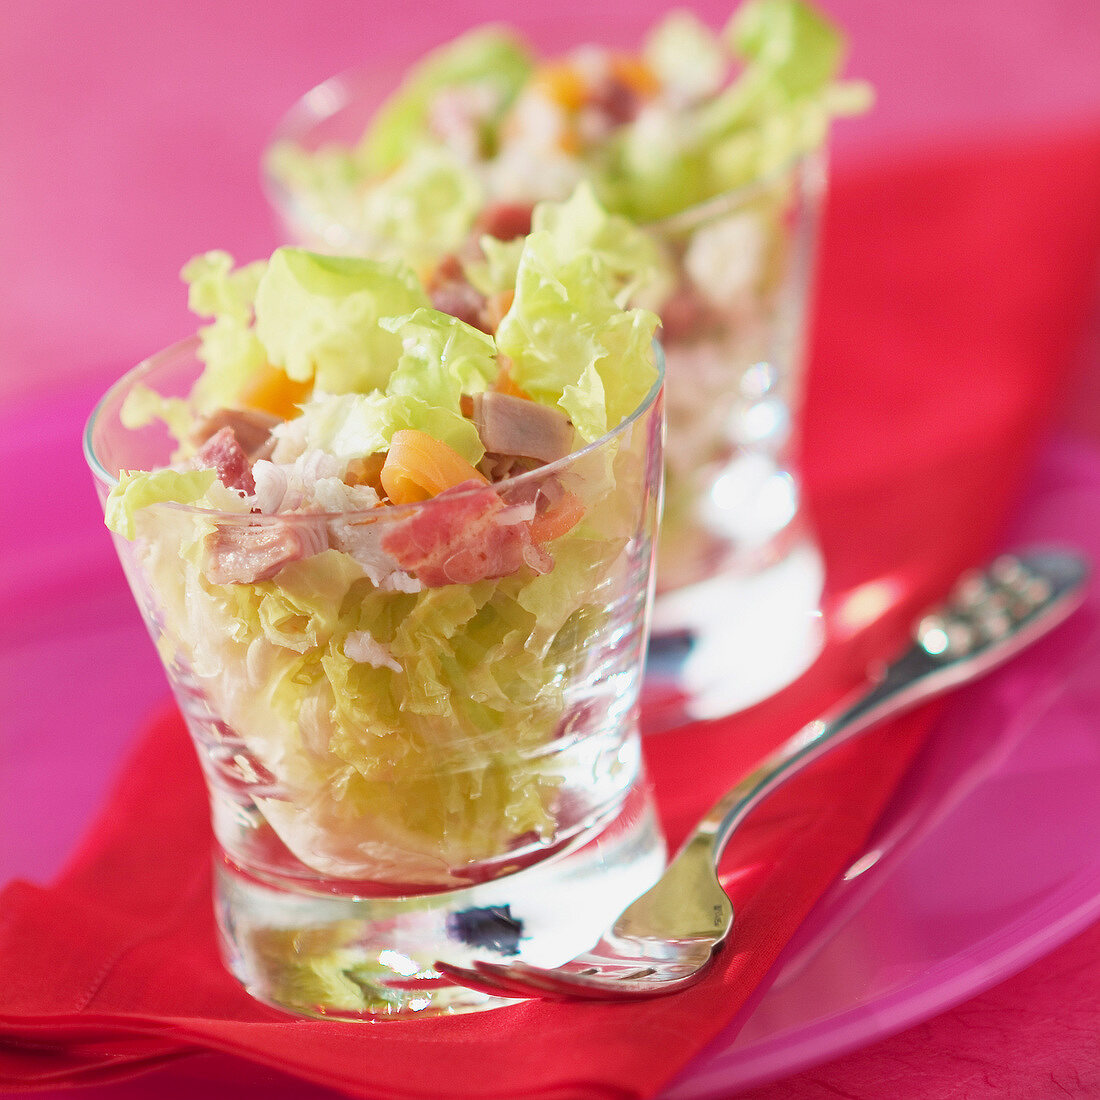 Seafood, bacon and lettuce salad